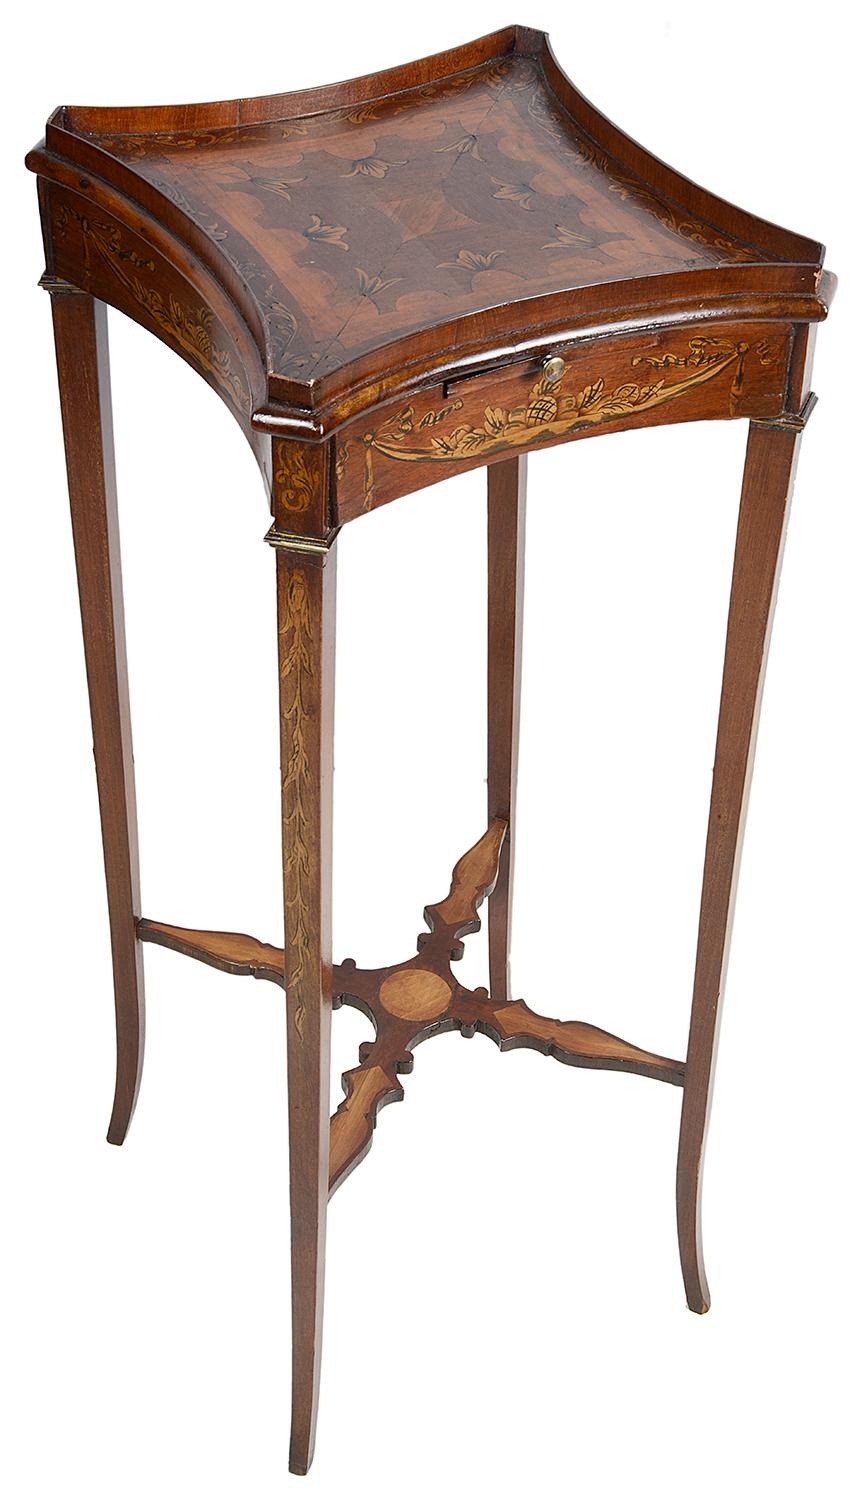 Sheraton Pair of 18th Century Style Inlaid Urn Stands